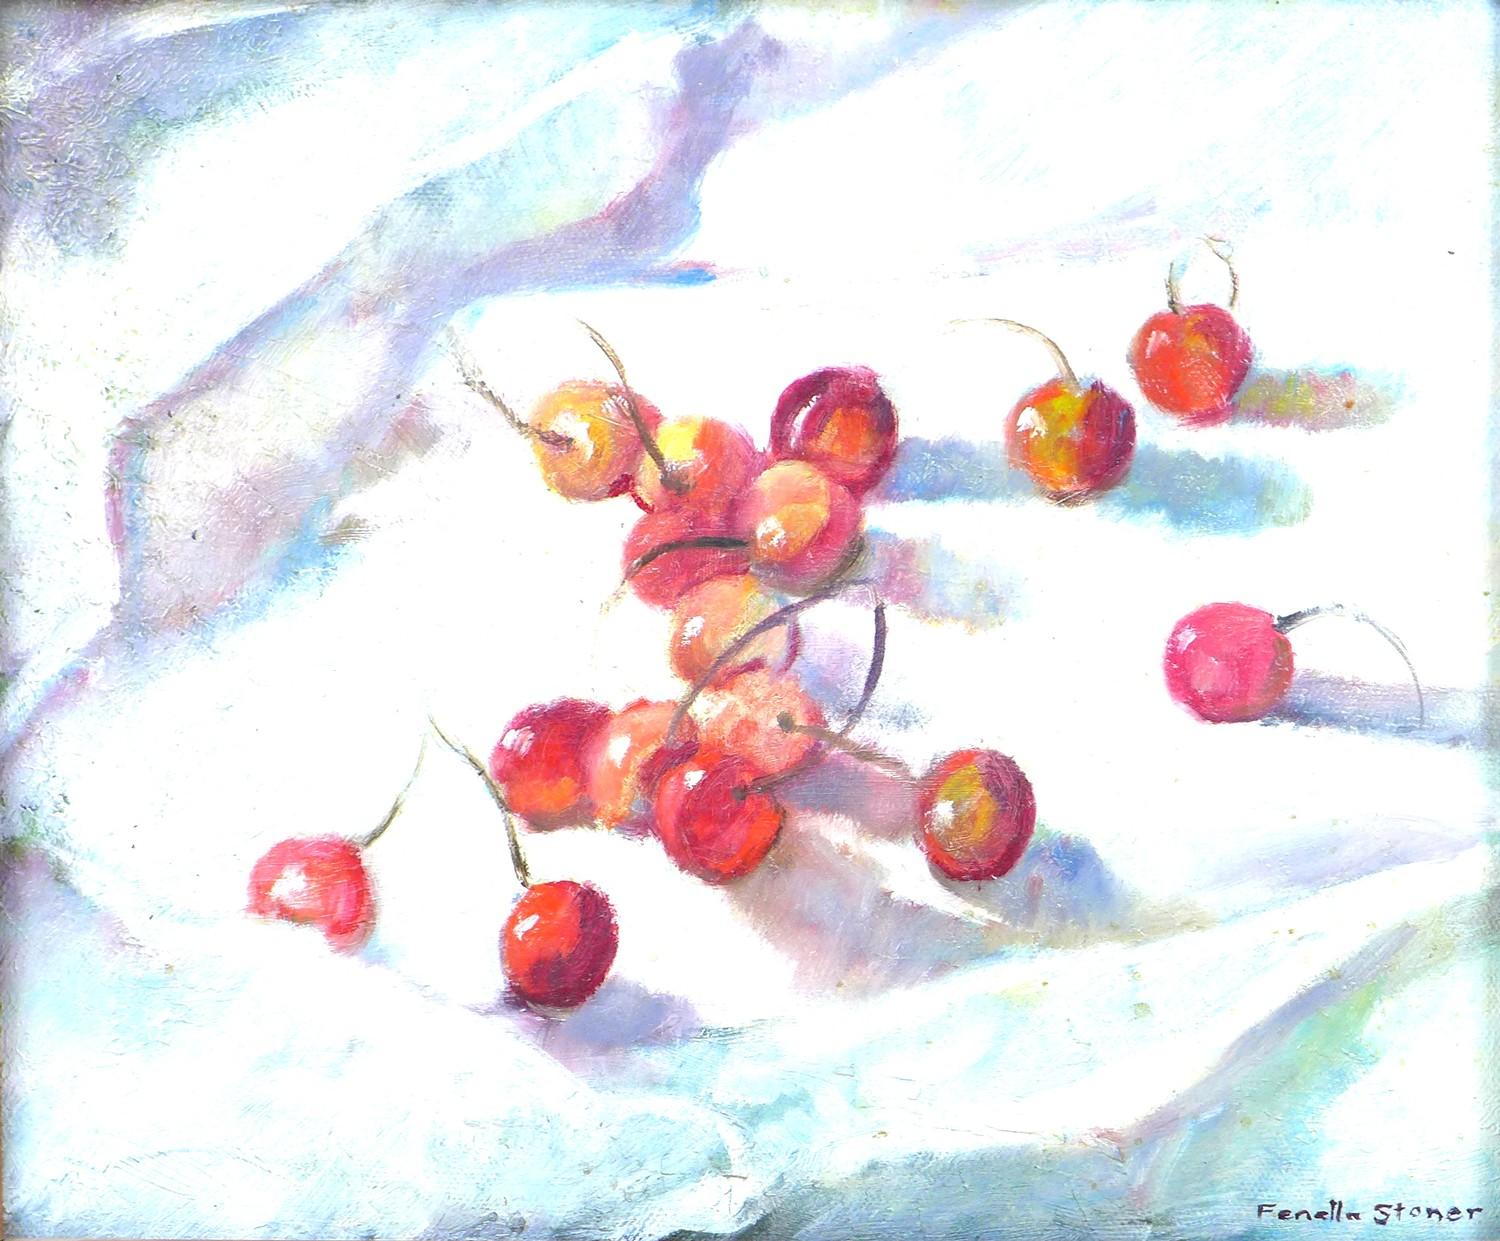 Fenella Stoner (British, 20th century): still life with sixteen cherries on a white tablecloth,